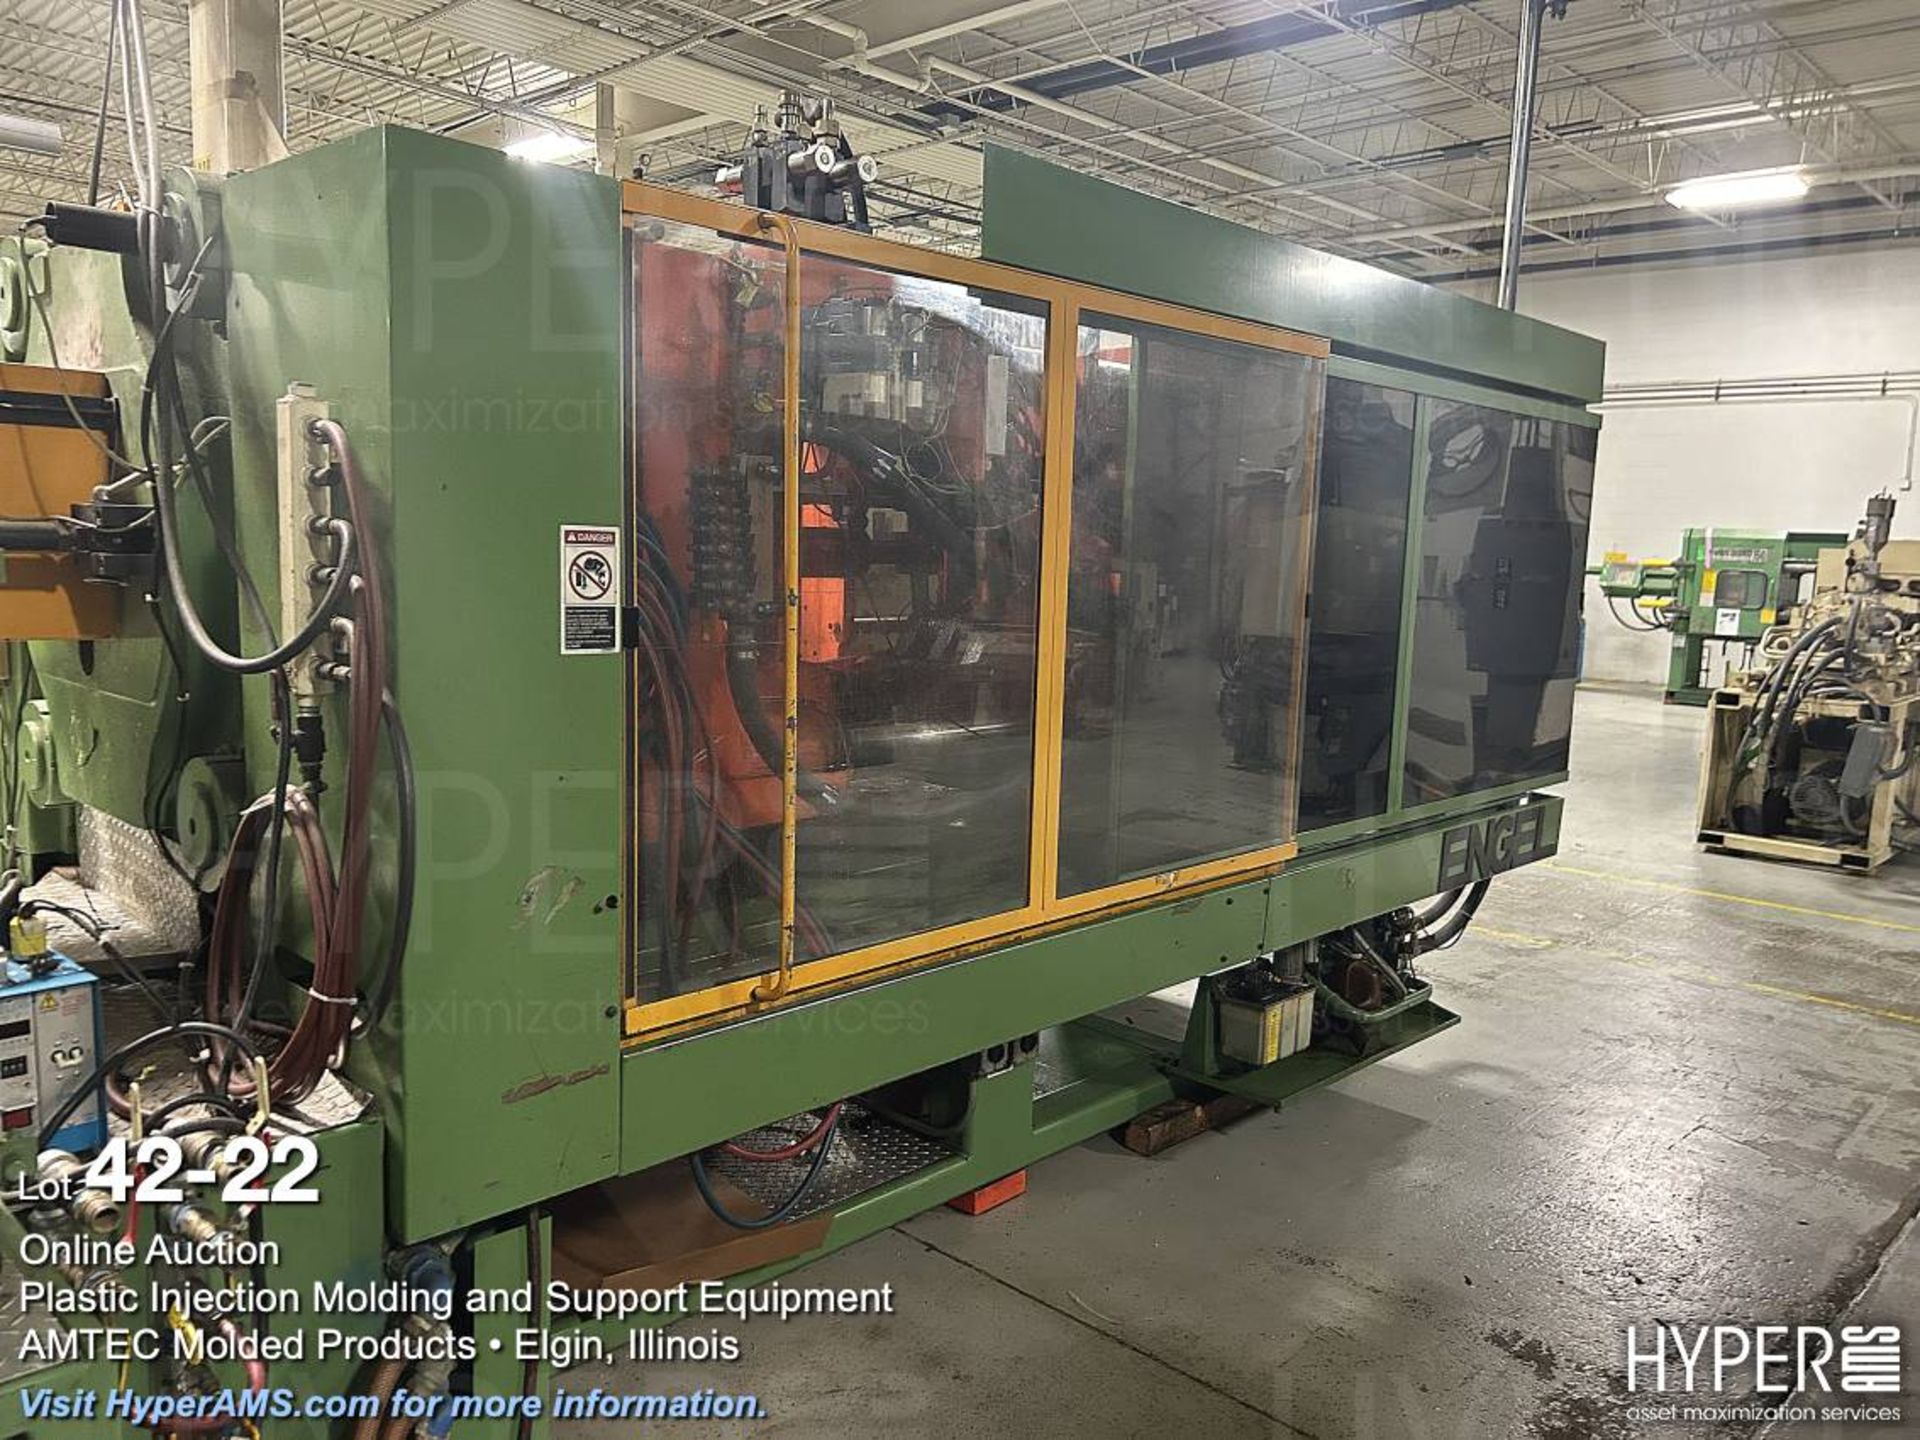 Engel ES2050/400AH toggle clamp plastic injection molding machine - Image 22 of 28